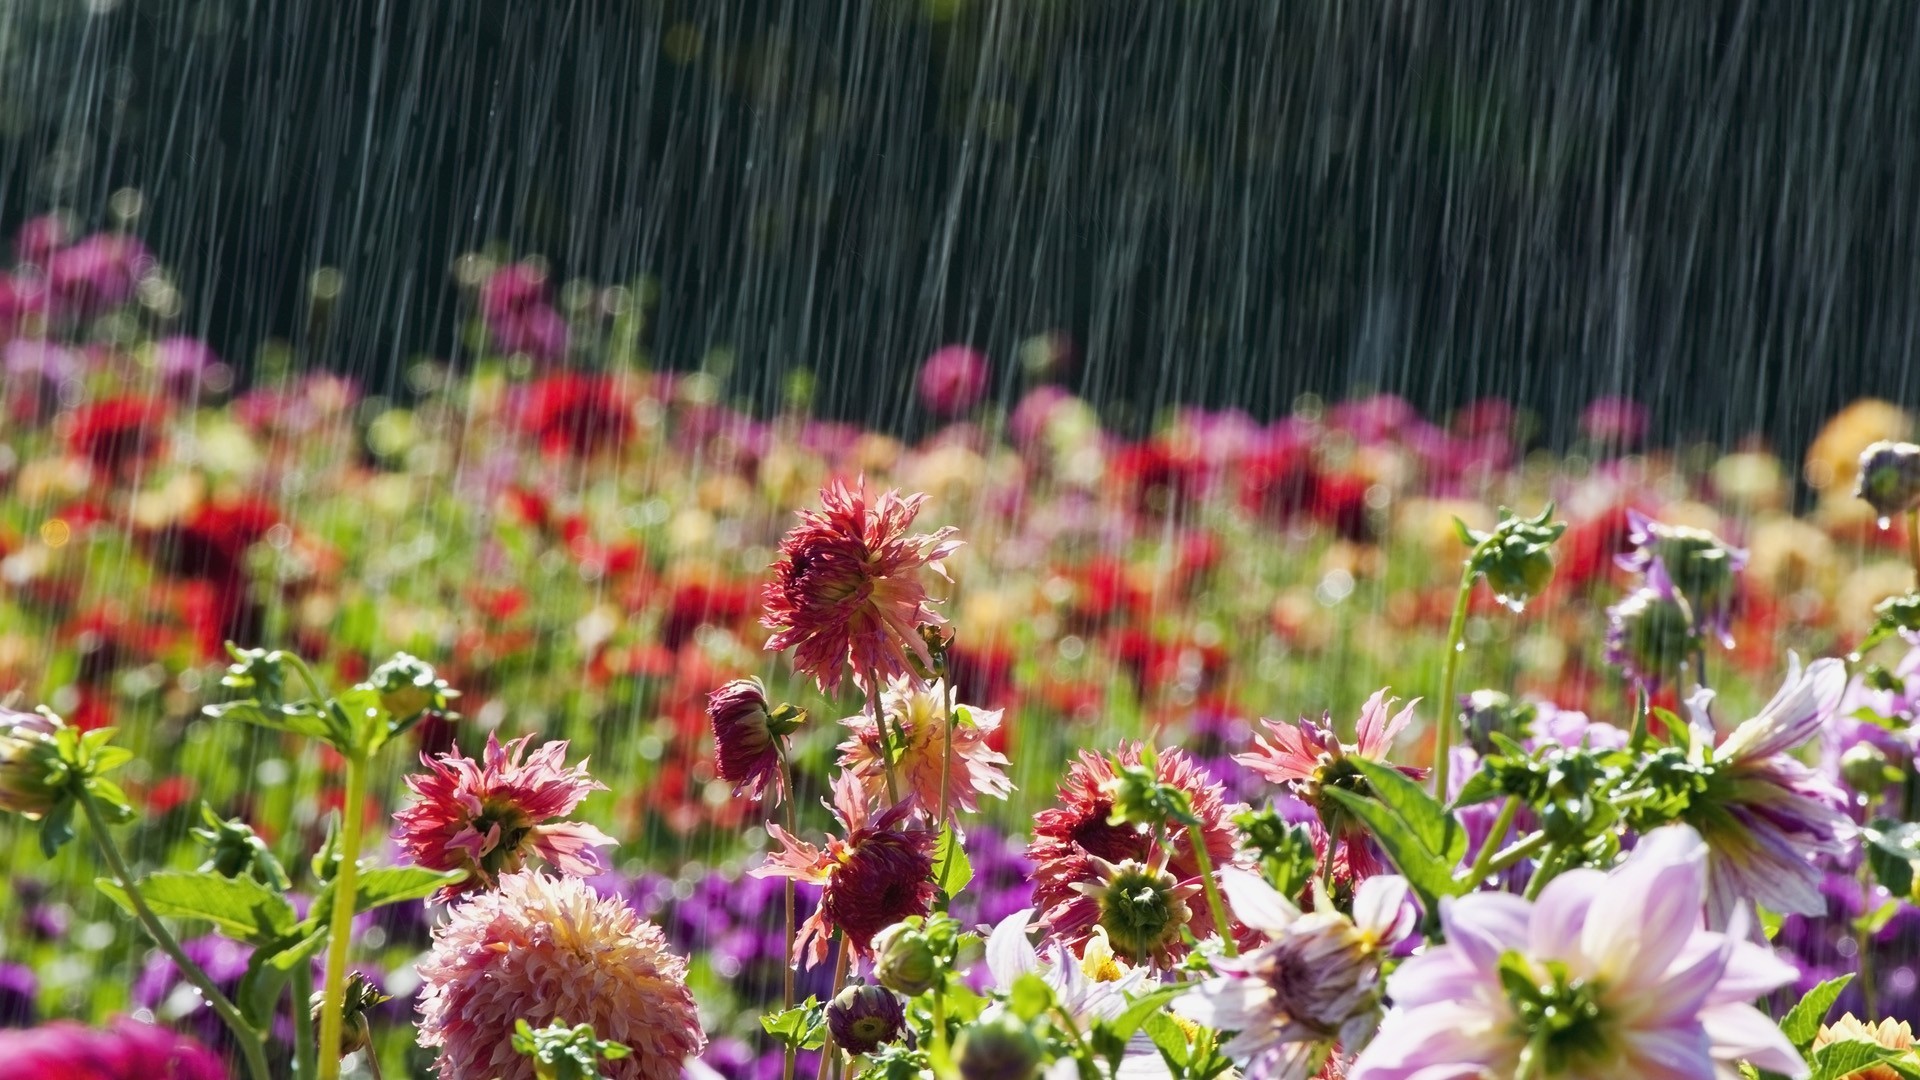 4. april showers bring may flowers wallpaper5 600×338